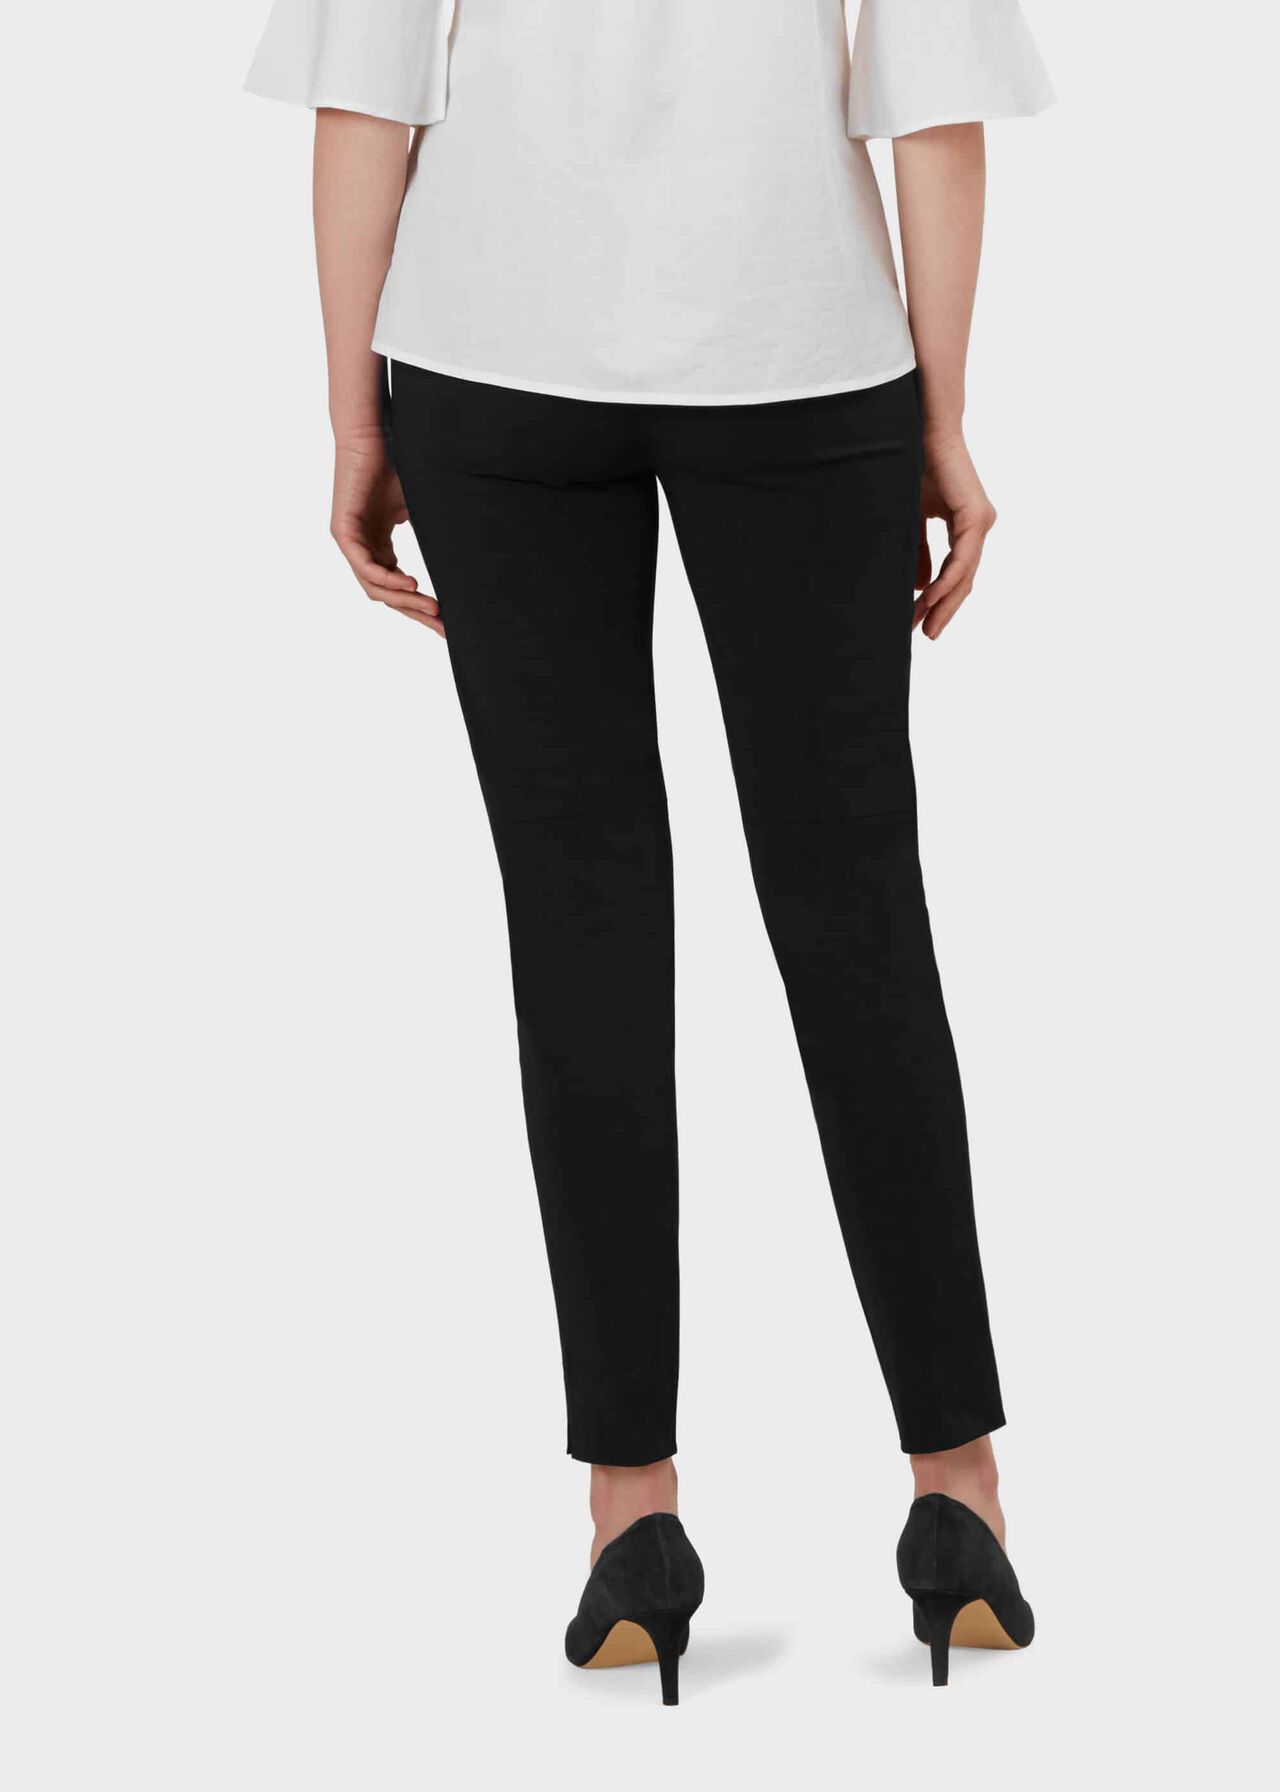 Adrianna trousers With Stretch, Black, hi-res